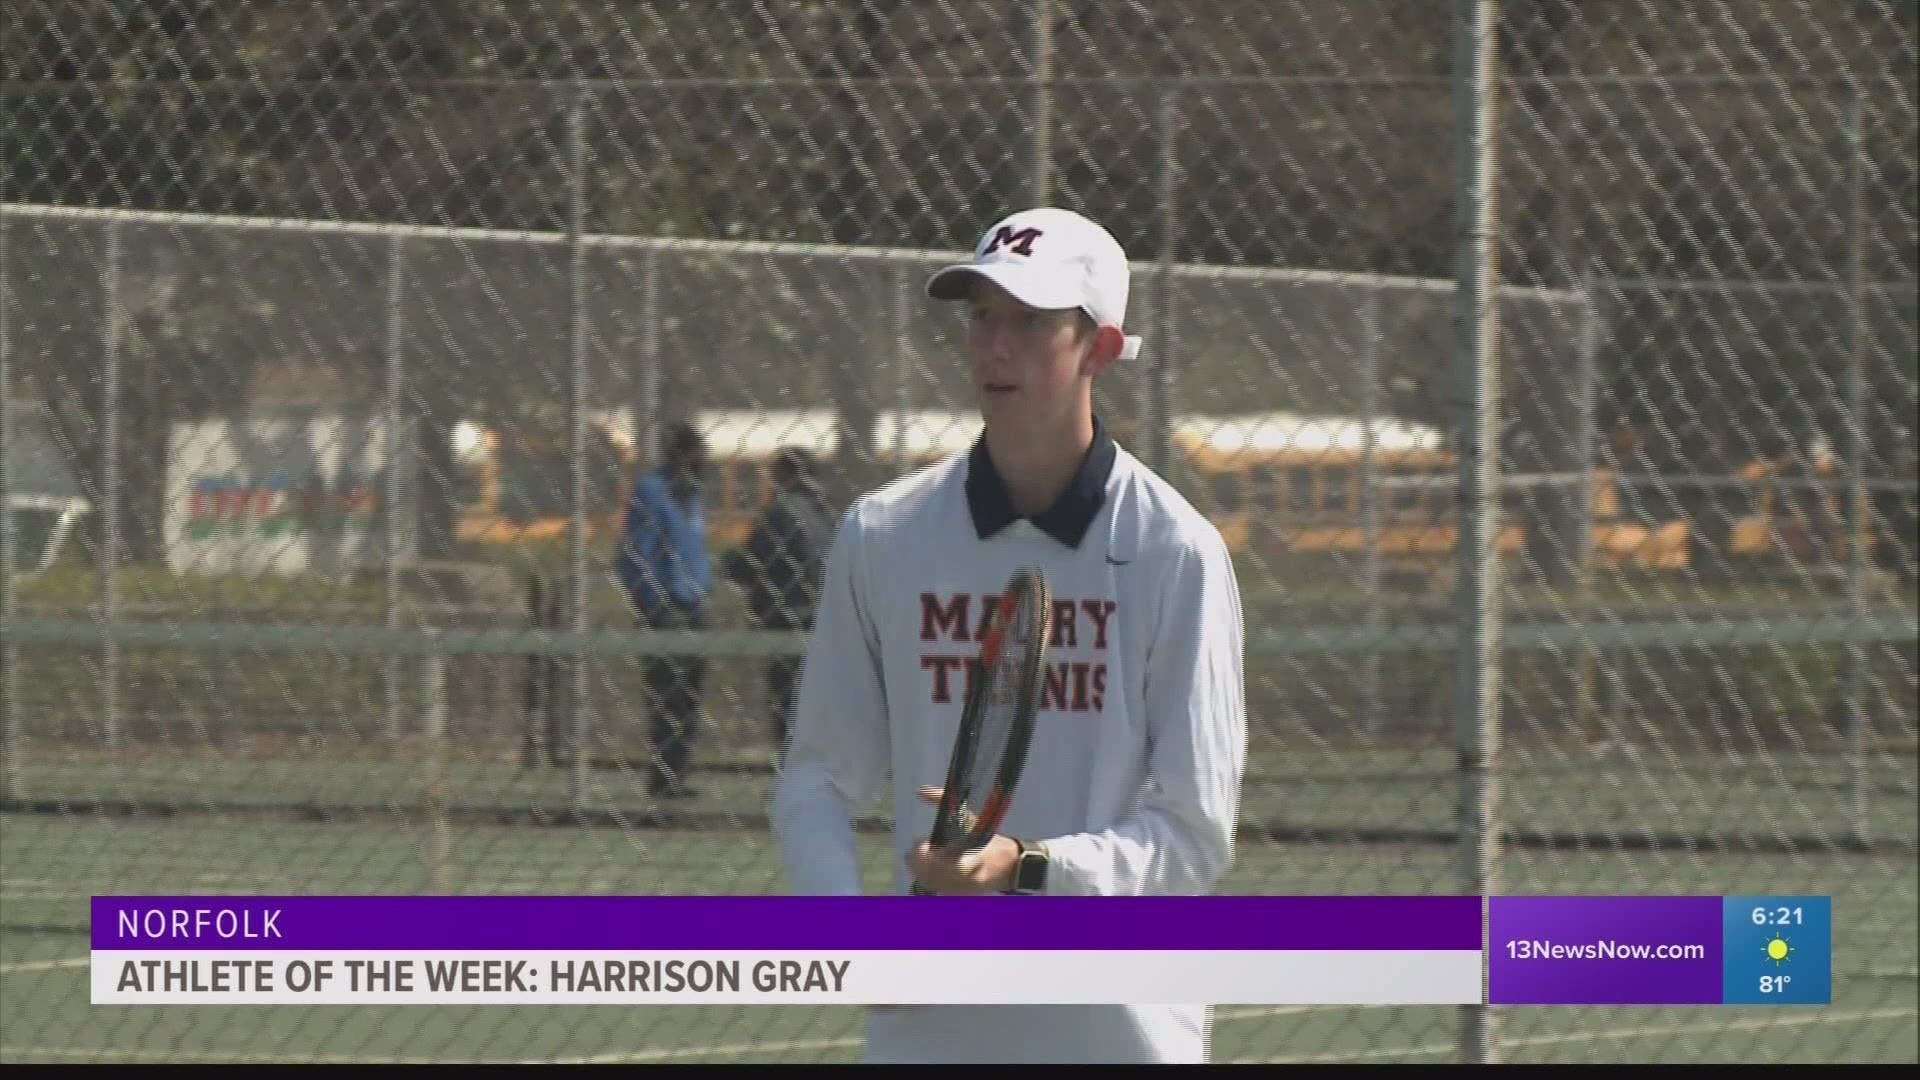 Maury tennis player, Harrison Gray leads the charge for the Commodores and is our Athlete Of The Week.